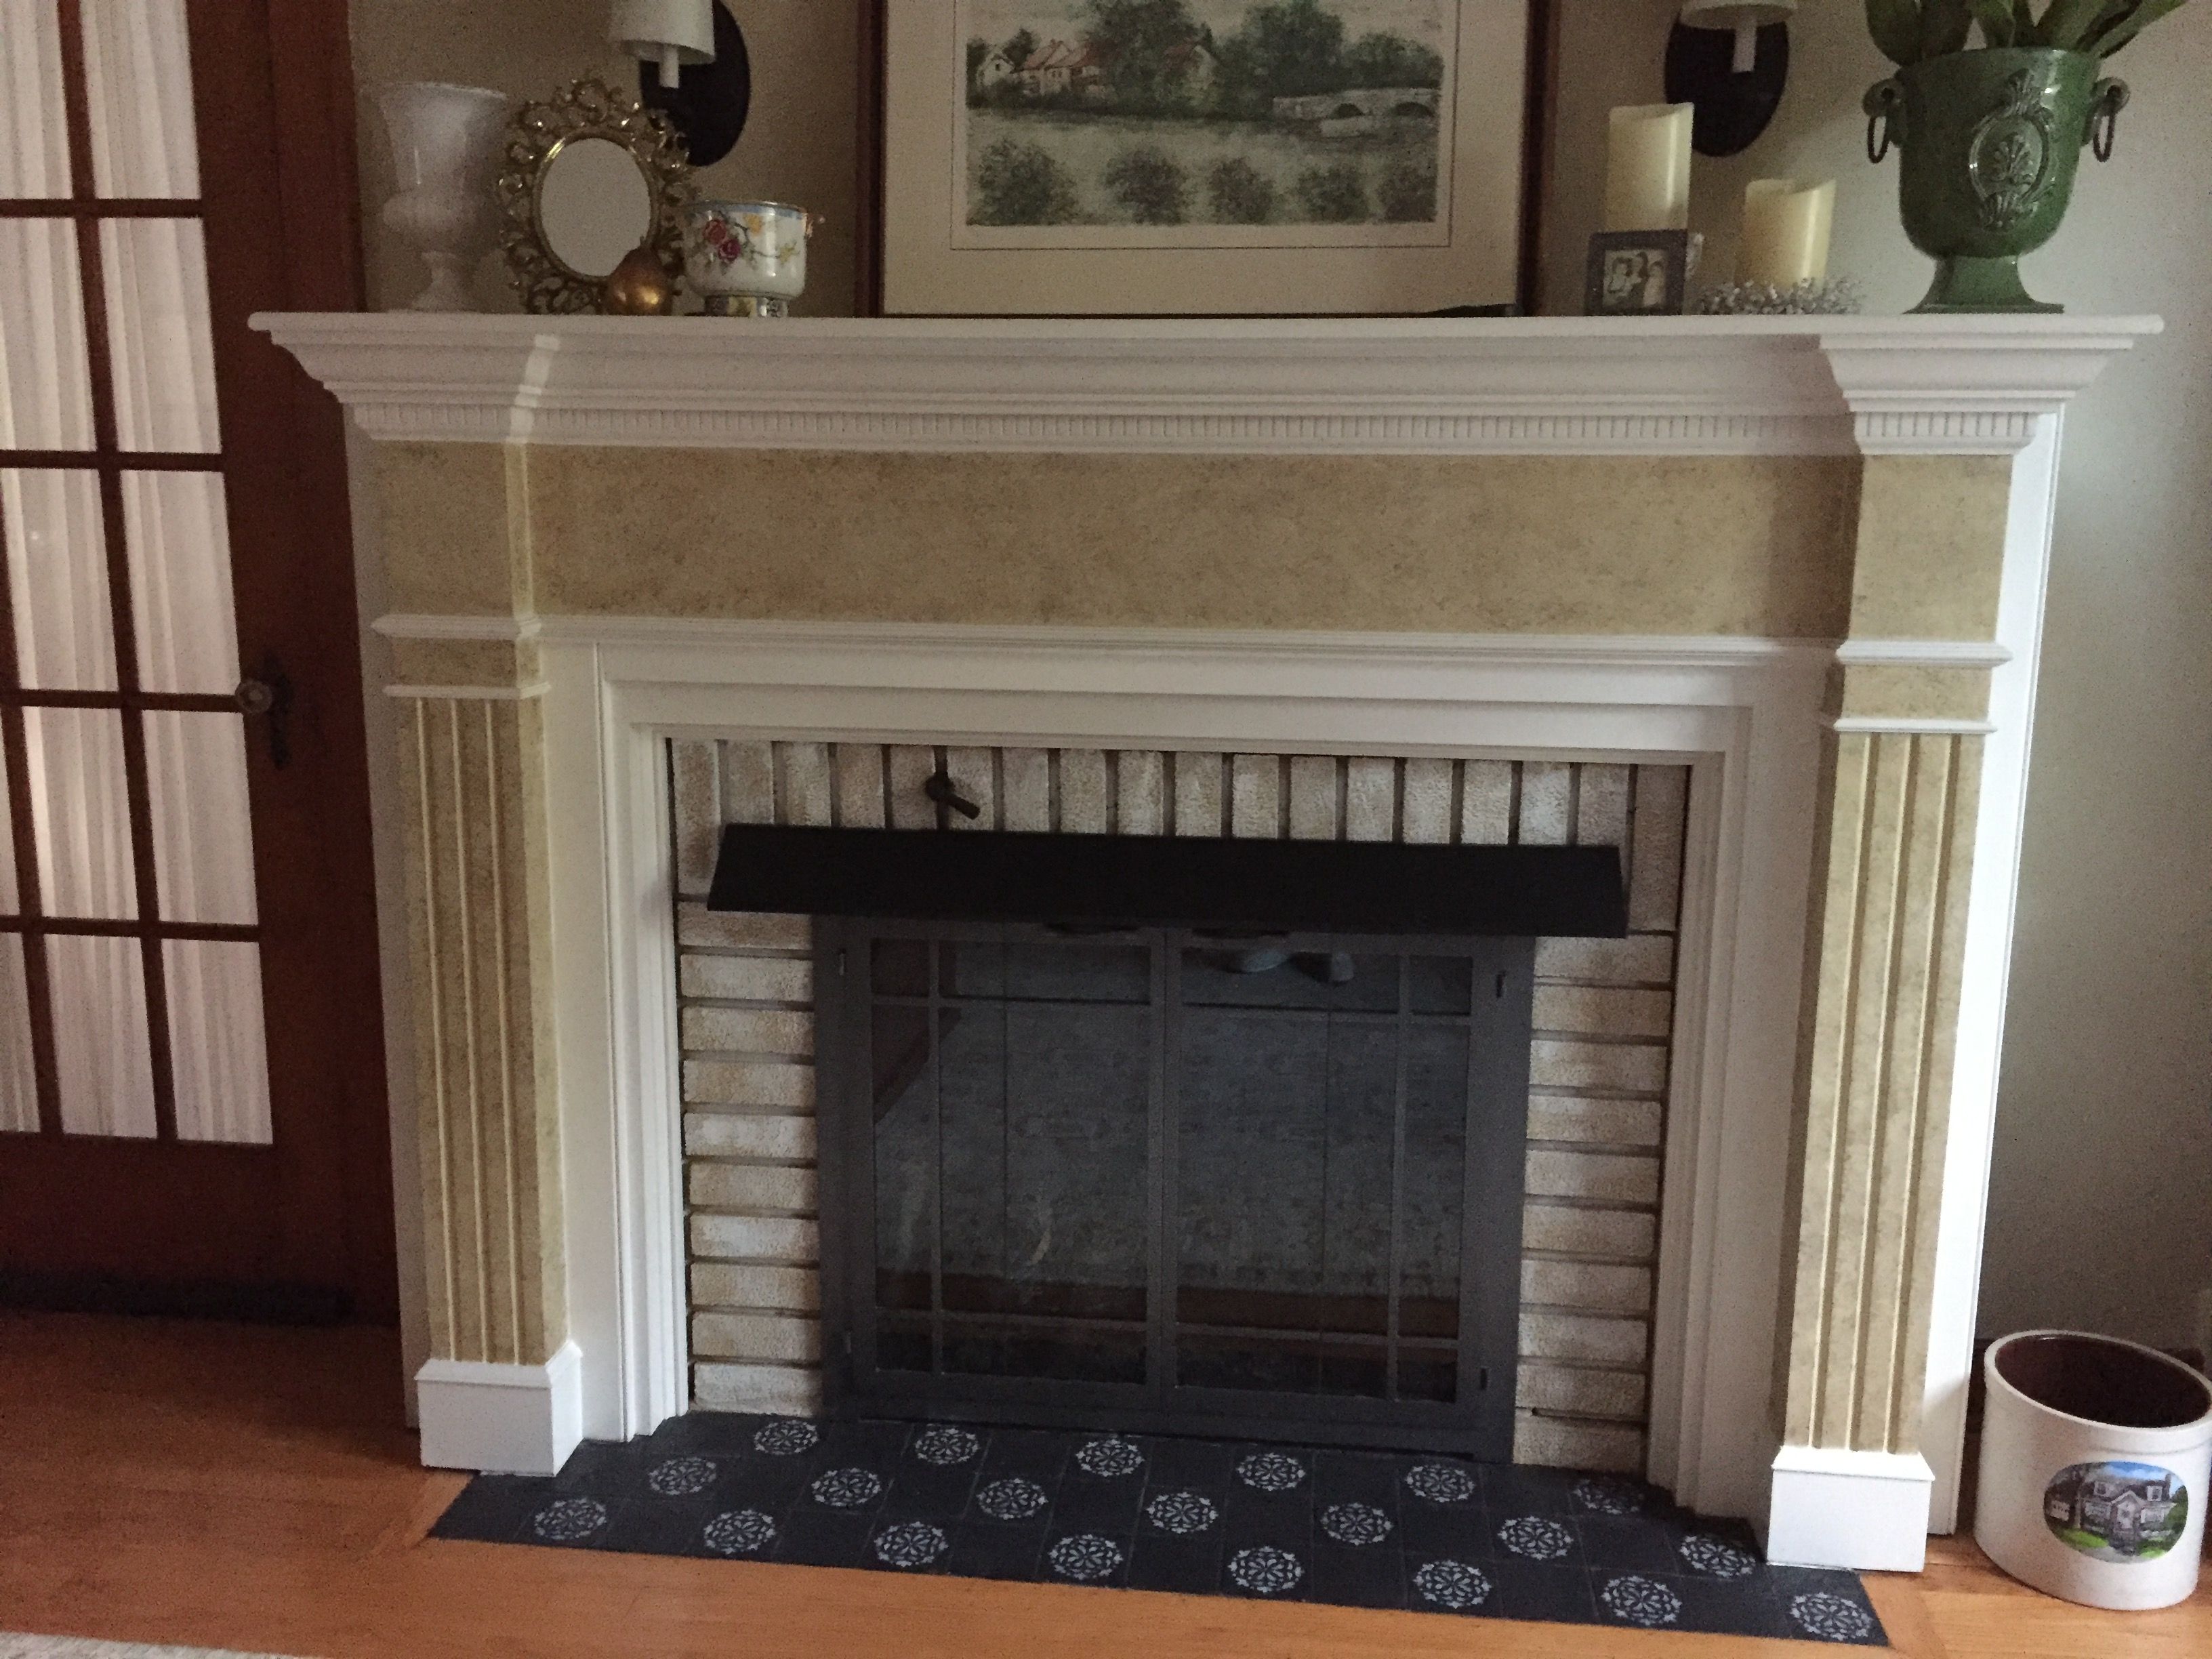 Fireplace Mantels San Diego Awesome Stencil Over Black Tile Just to Jazz Up the Fireplace